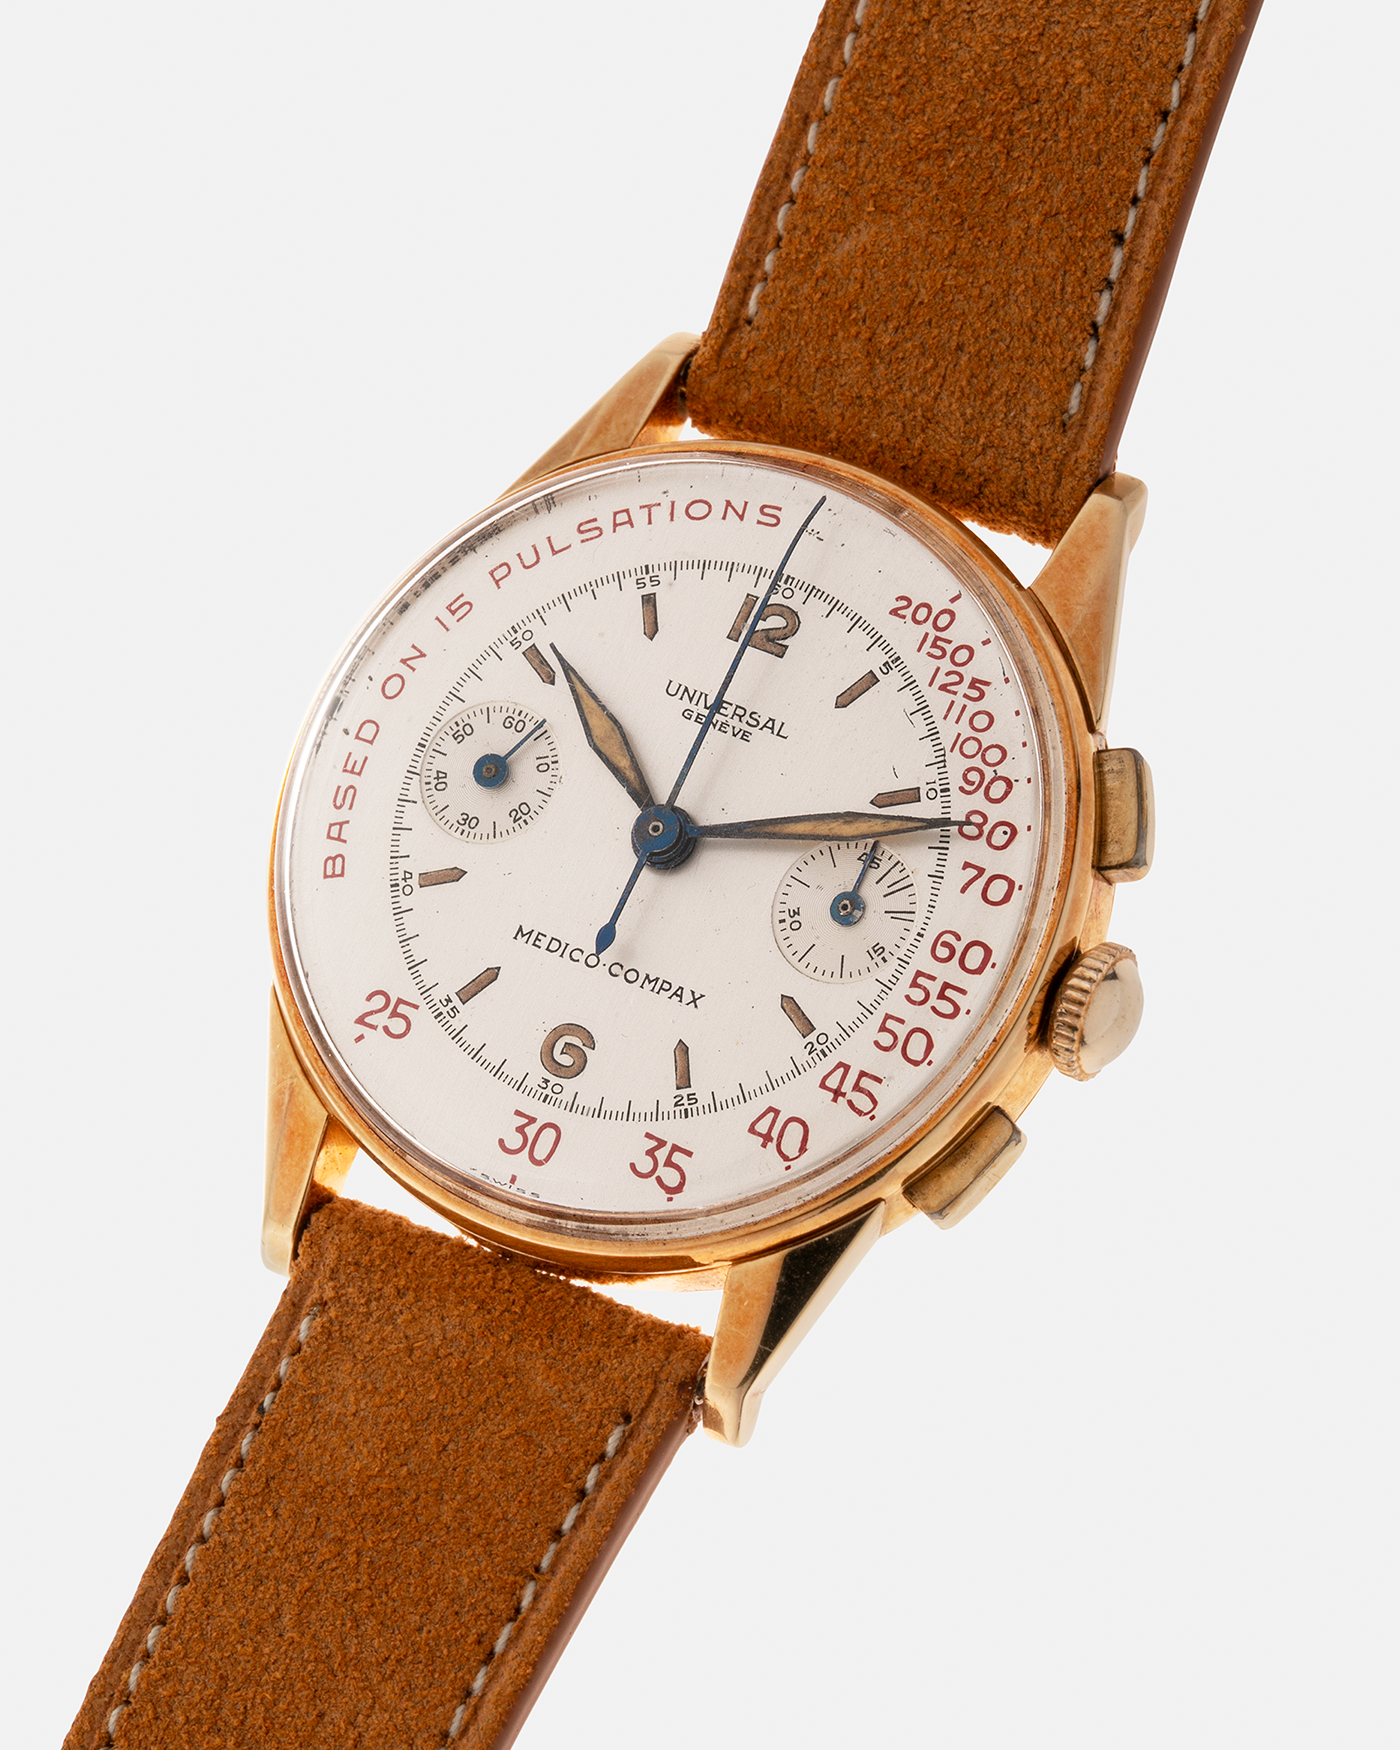 Brand: Universal Genève Year: 1940’s Reference Number: 12426 Material: 18-carat Yellow Gold Movement: Universal Genève Cal. 285, Manual-Winding Case Diameter: 35mm Strap: Nostime Brown Suede Leather Strap